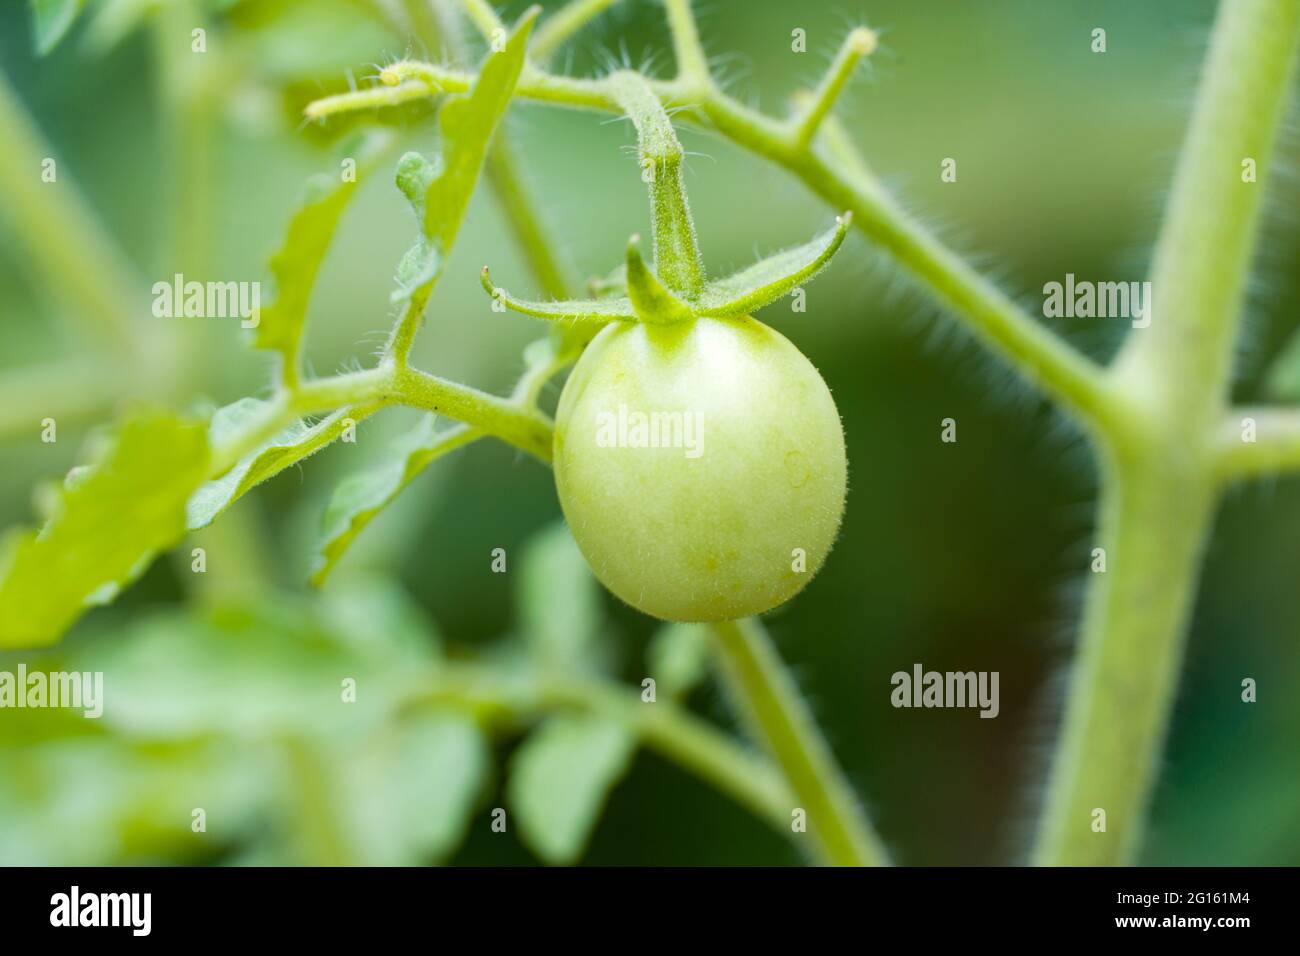 green tomatoes on the natural plant gardening blurry background Stock Photo